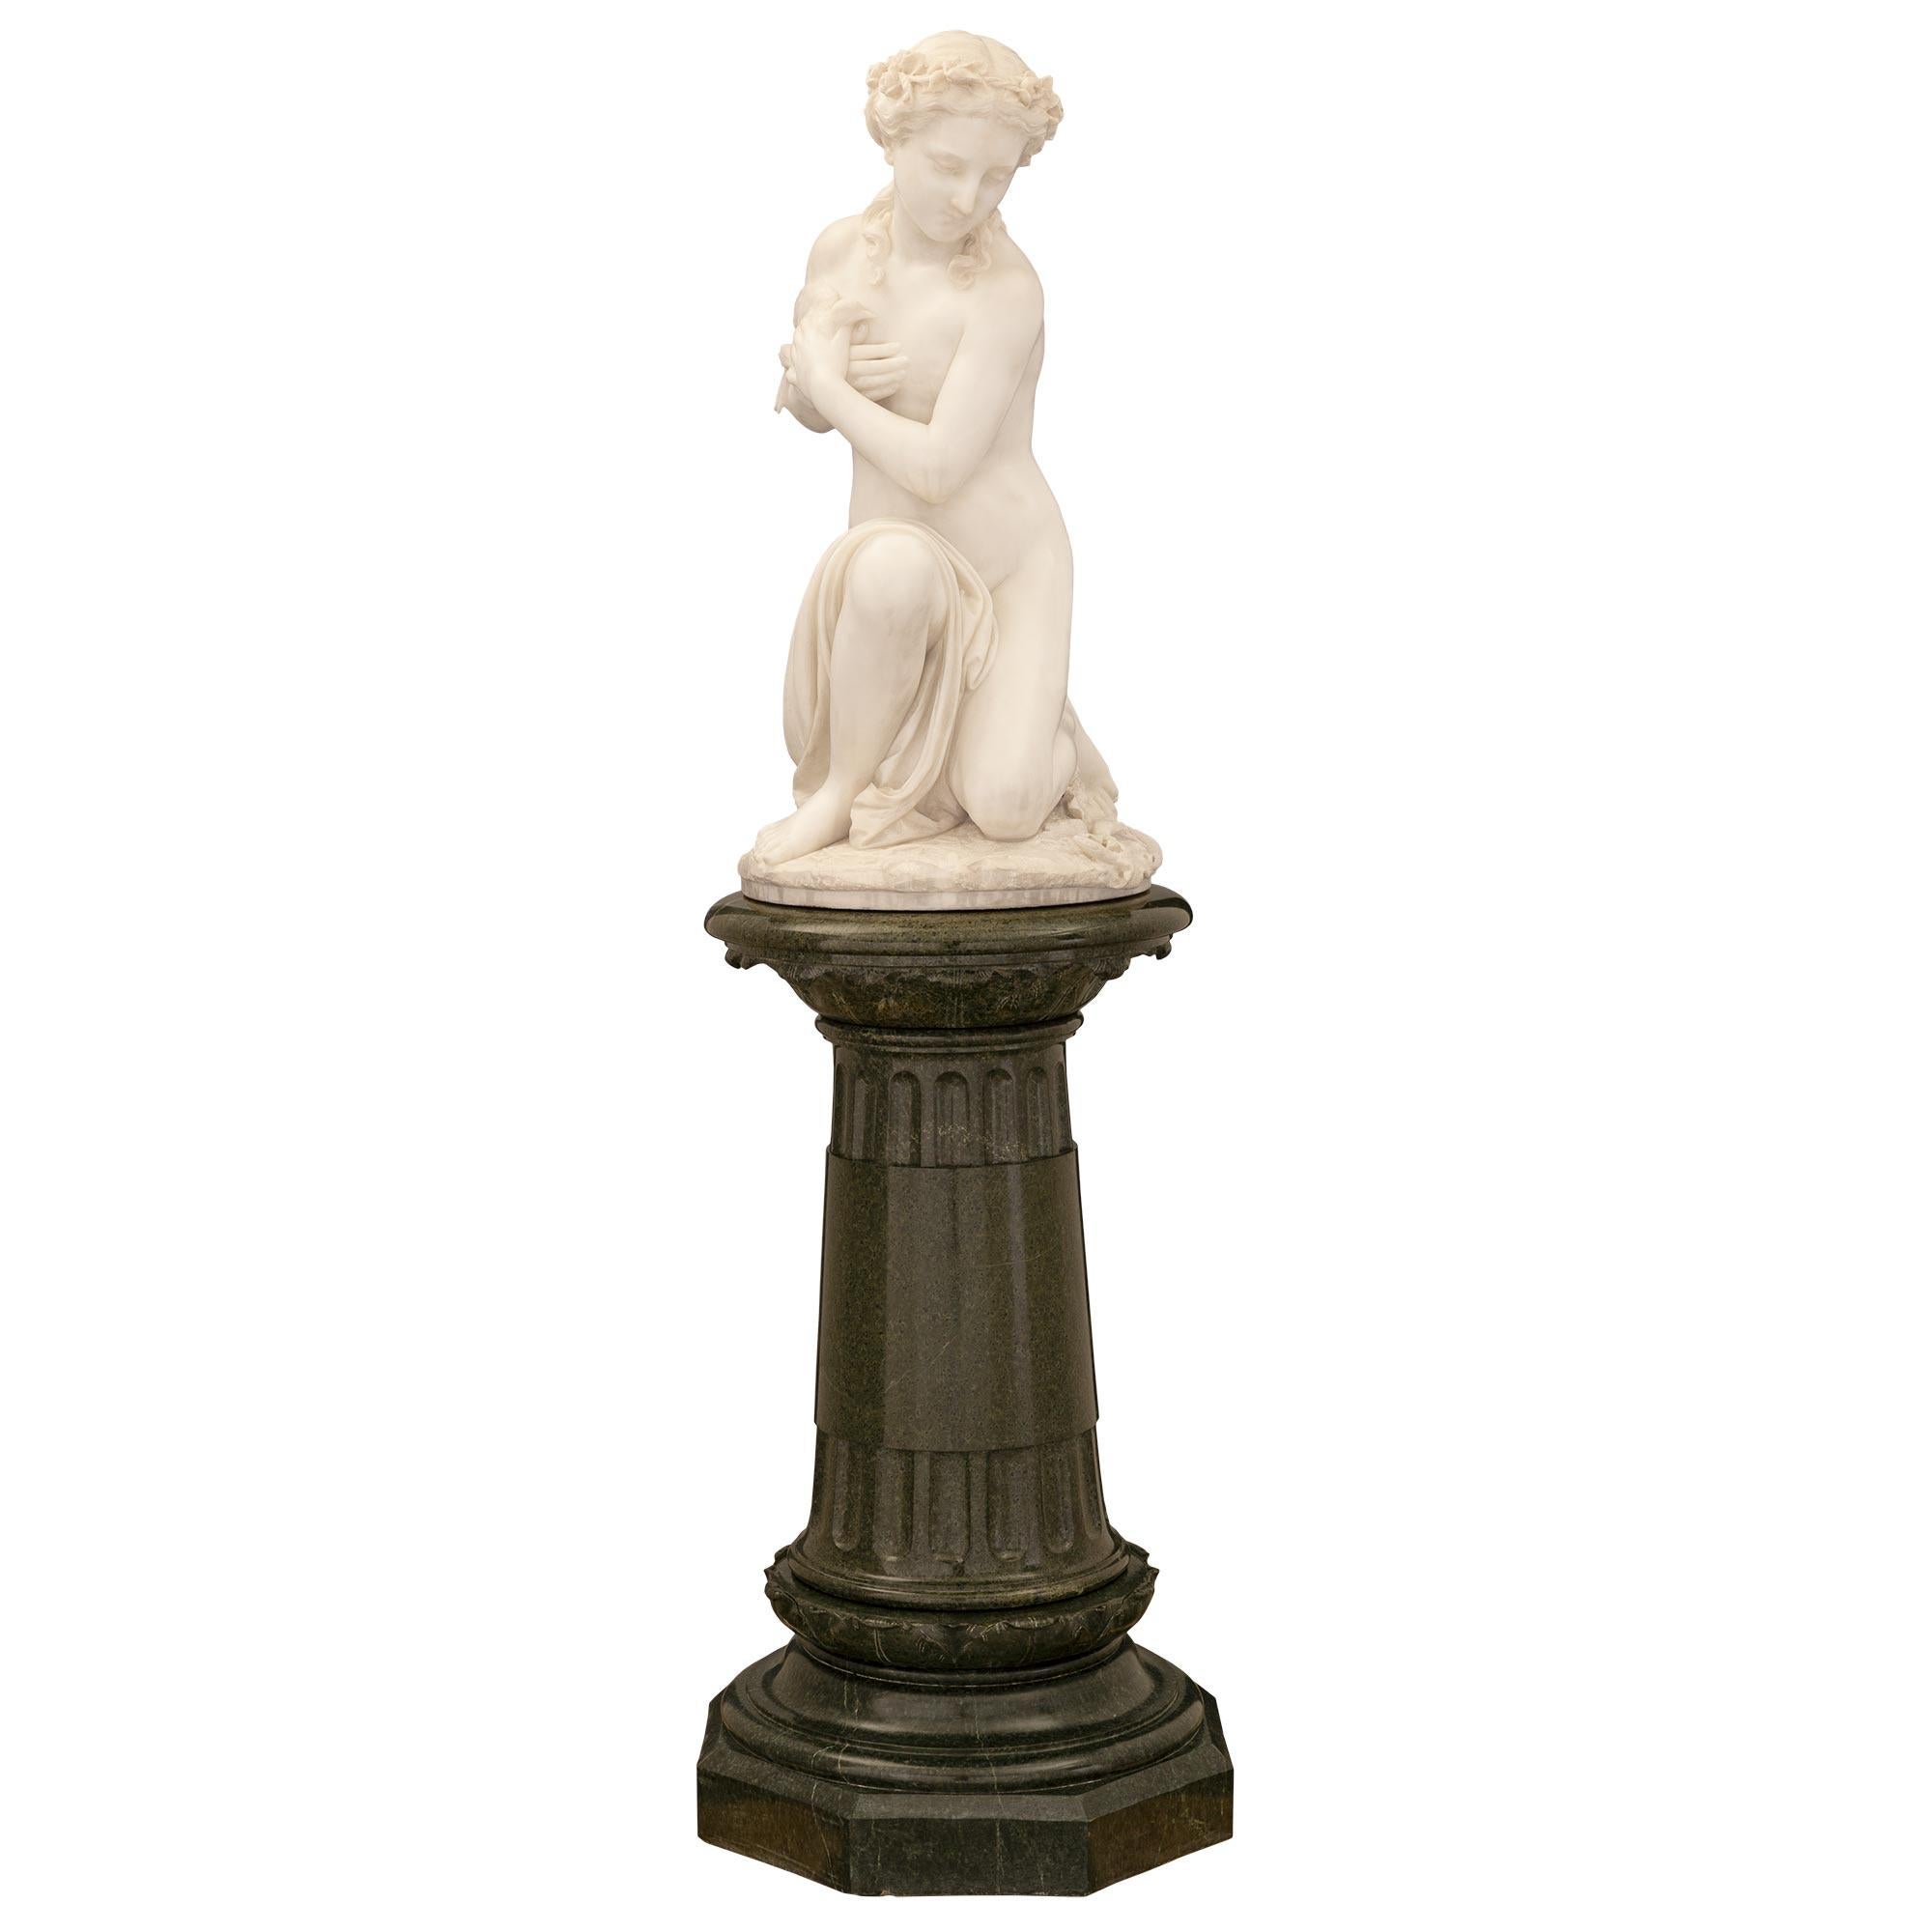 An exquisite and extremely high quality Italian 19th century white Carrara marble statue on its original Vert de Patricia marble pedestal signed Prof. R. Romanelli Firenze. The impressive pedestal displays a fine octagonal base below an elegant